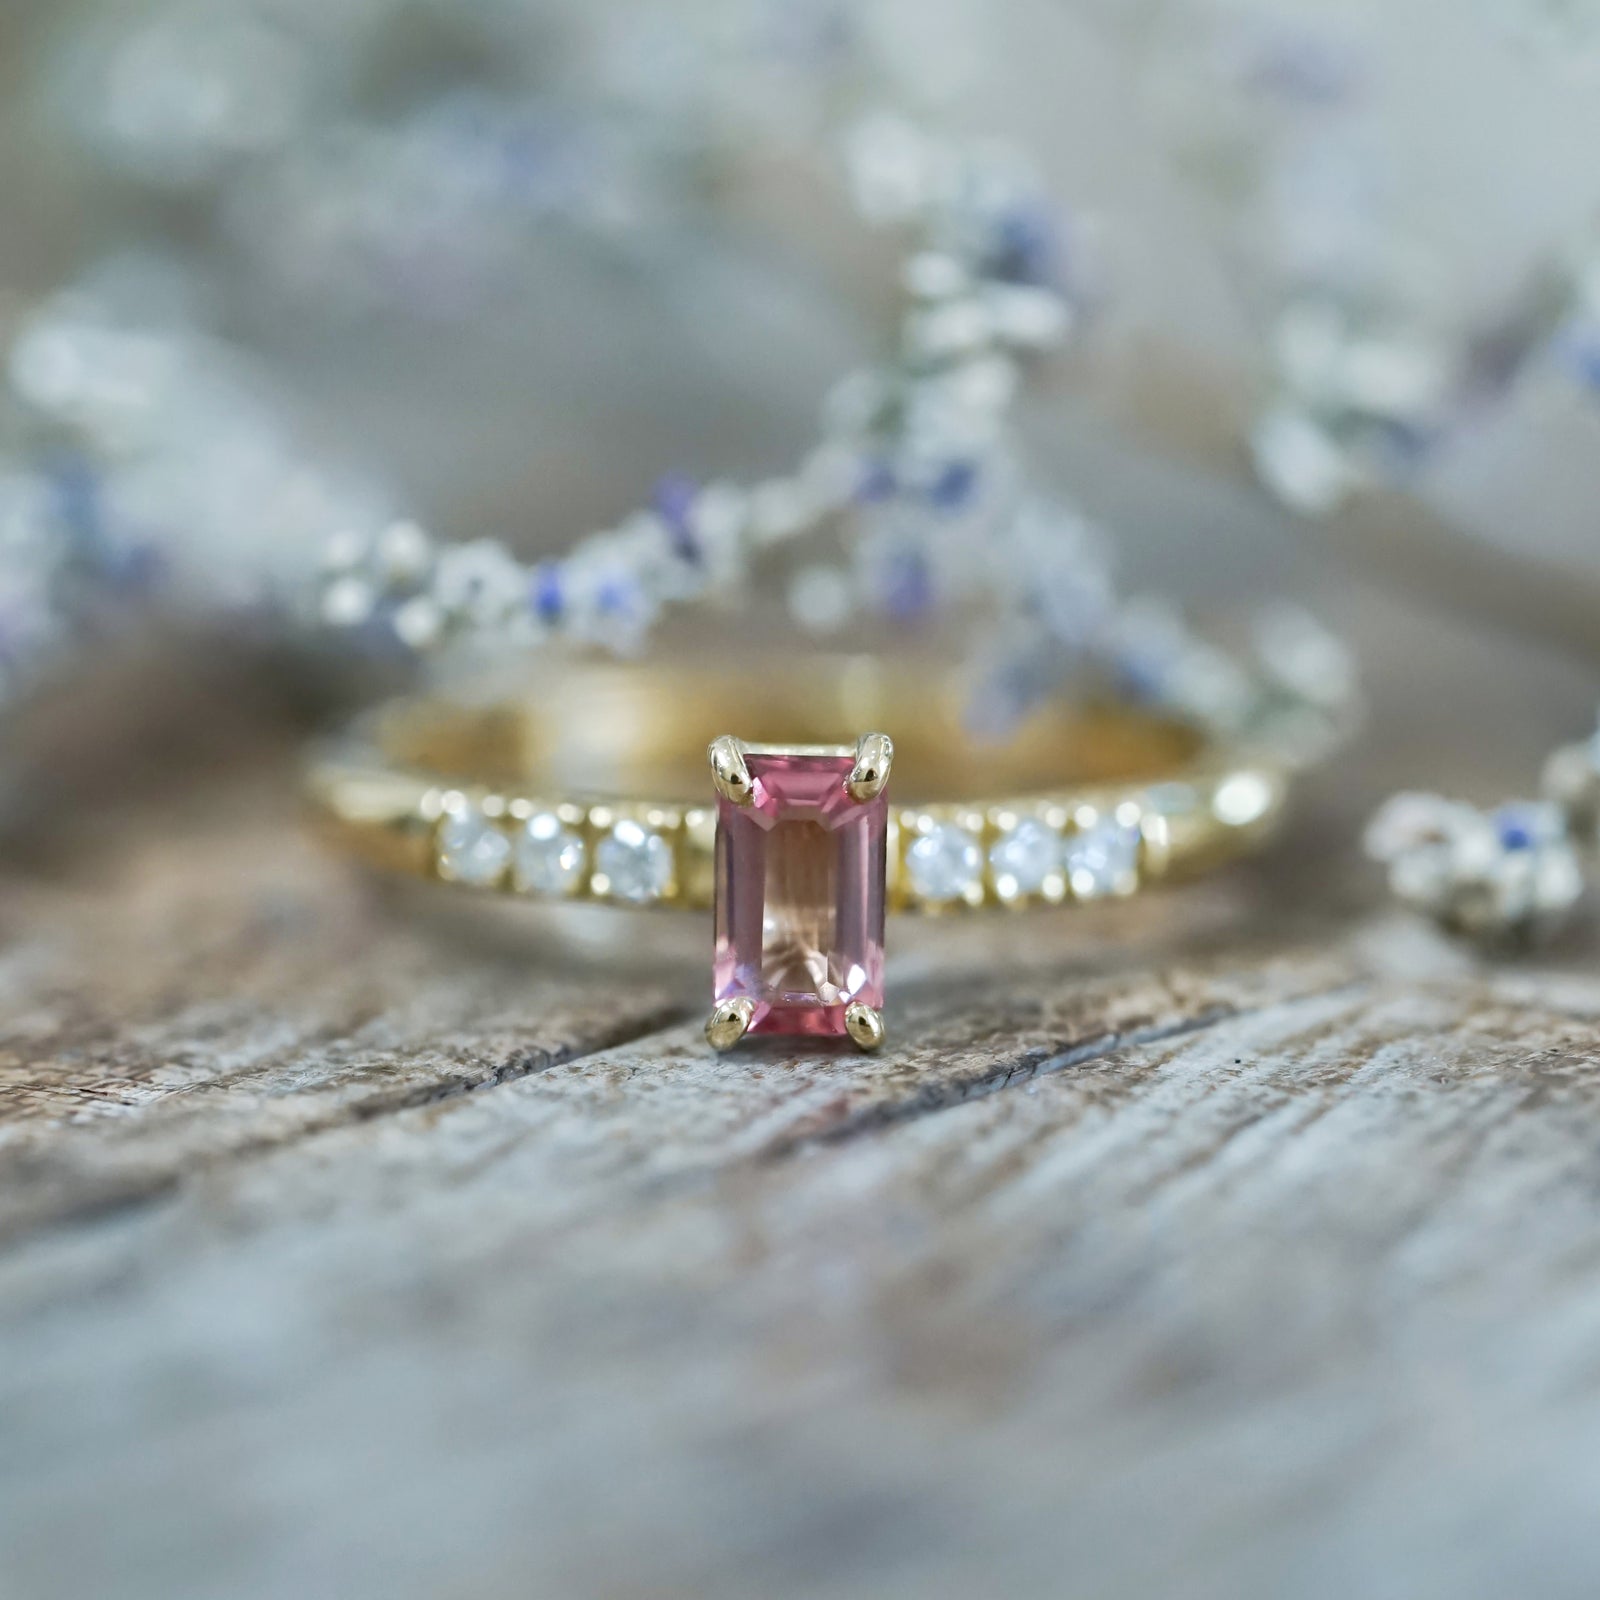 Newest Arrivals Engagement Emerald Cut 5x7mm 18kt Rose Gold Natural Diamond Pink  Tourmaline Ring Jewelry Loving Gift For Women - Rings - AliExpress